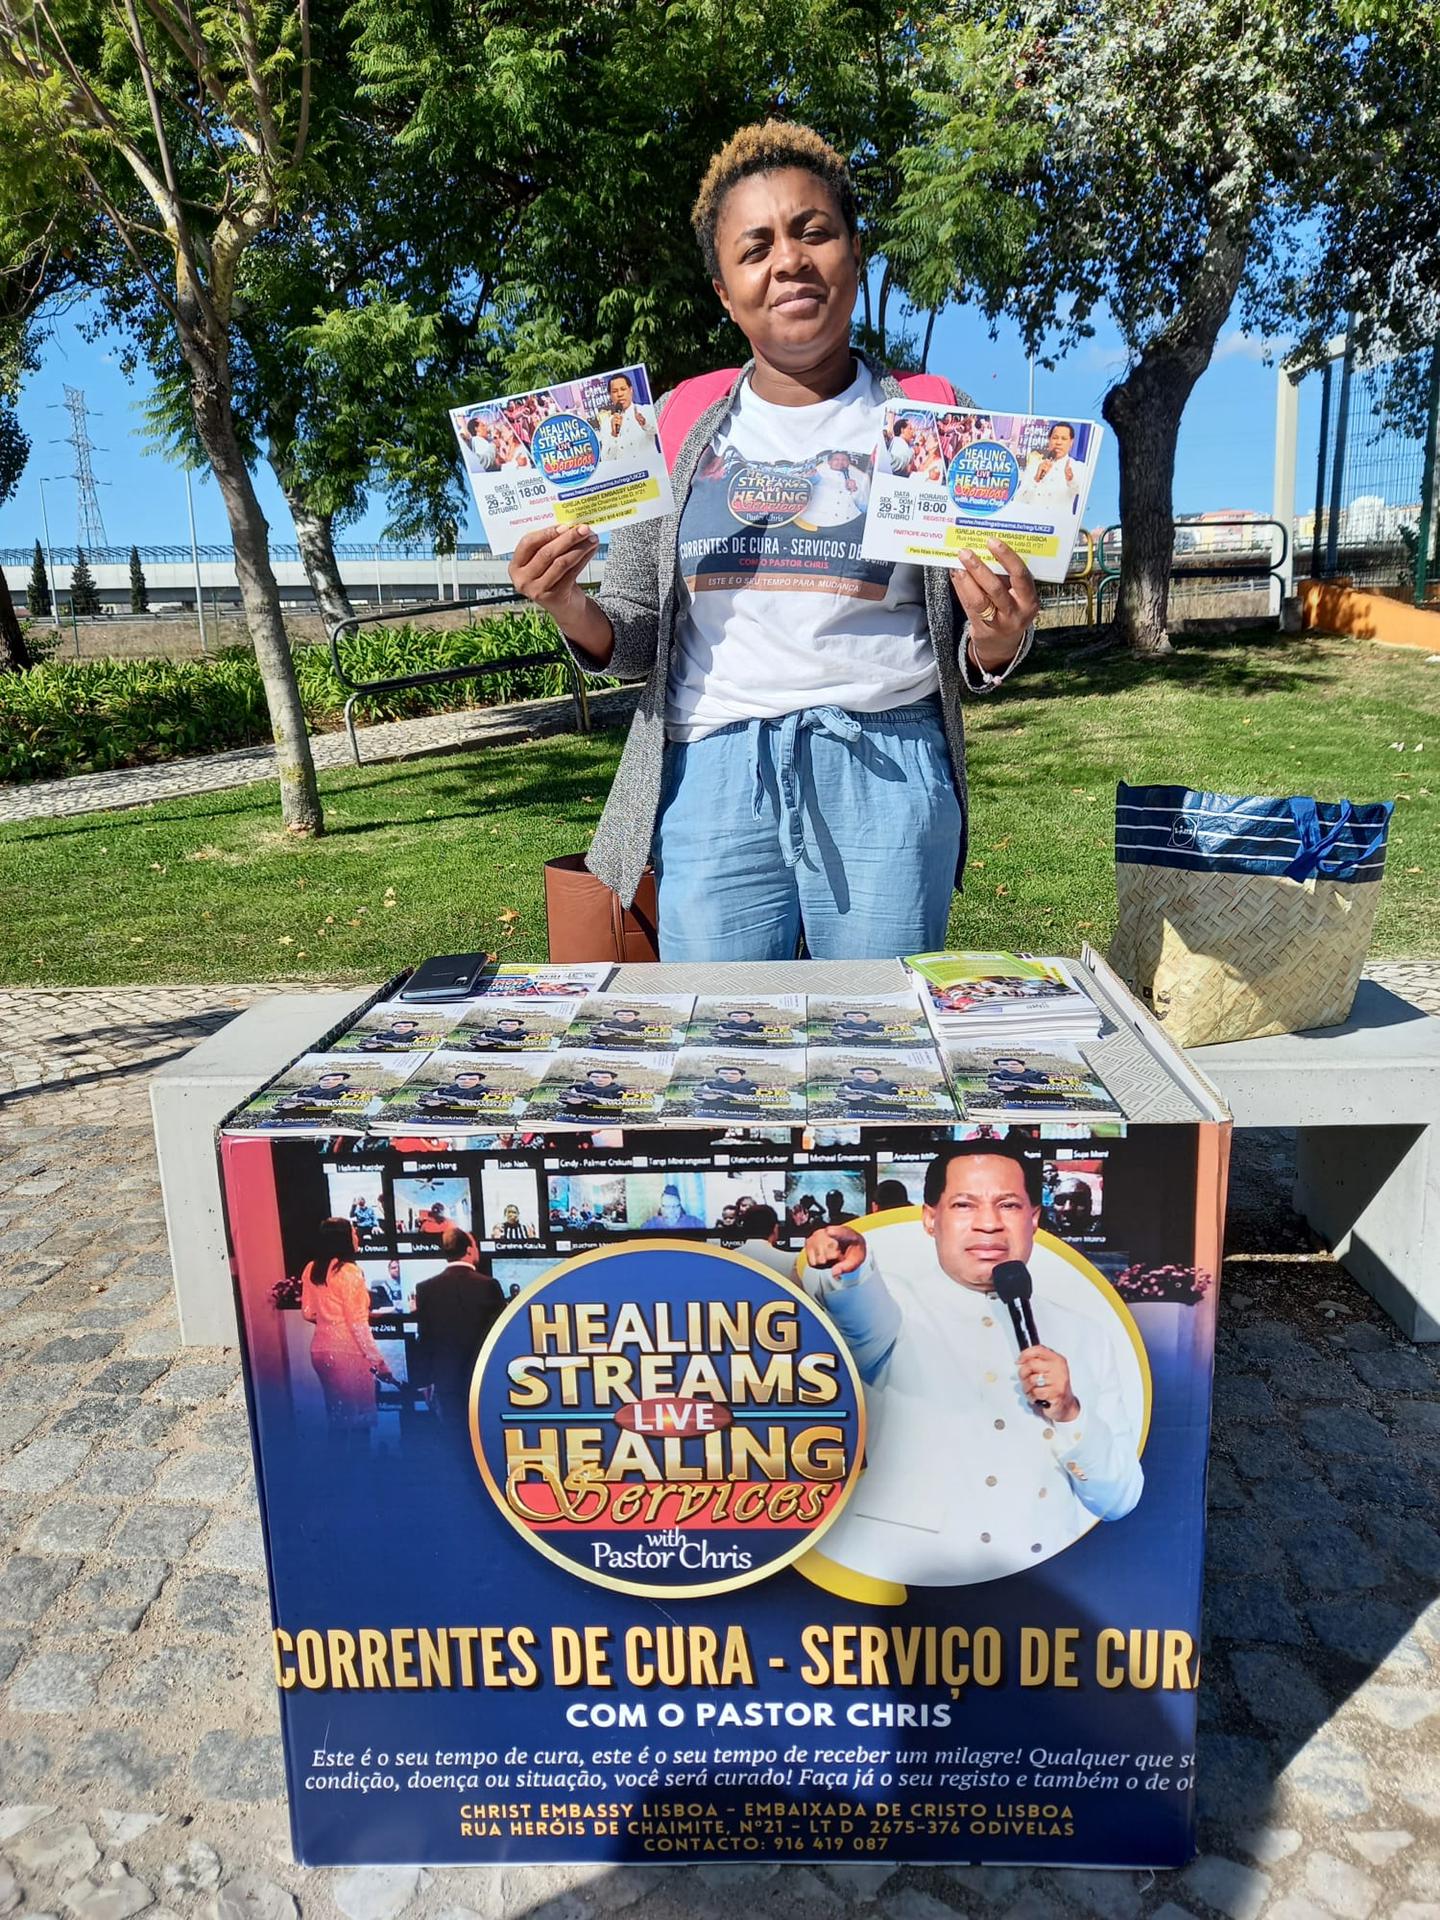 MORE SIGHTS OF PUBLICITY FOR THE LIVE HEALING SERVICES WITH PASTOR CHRIS IN PORTUGAL